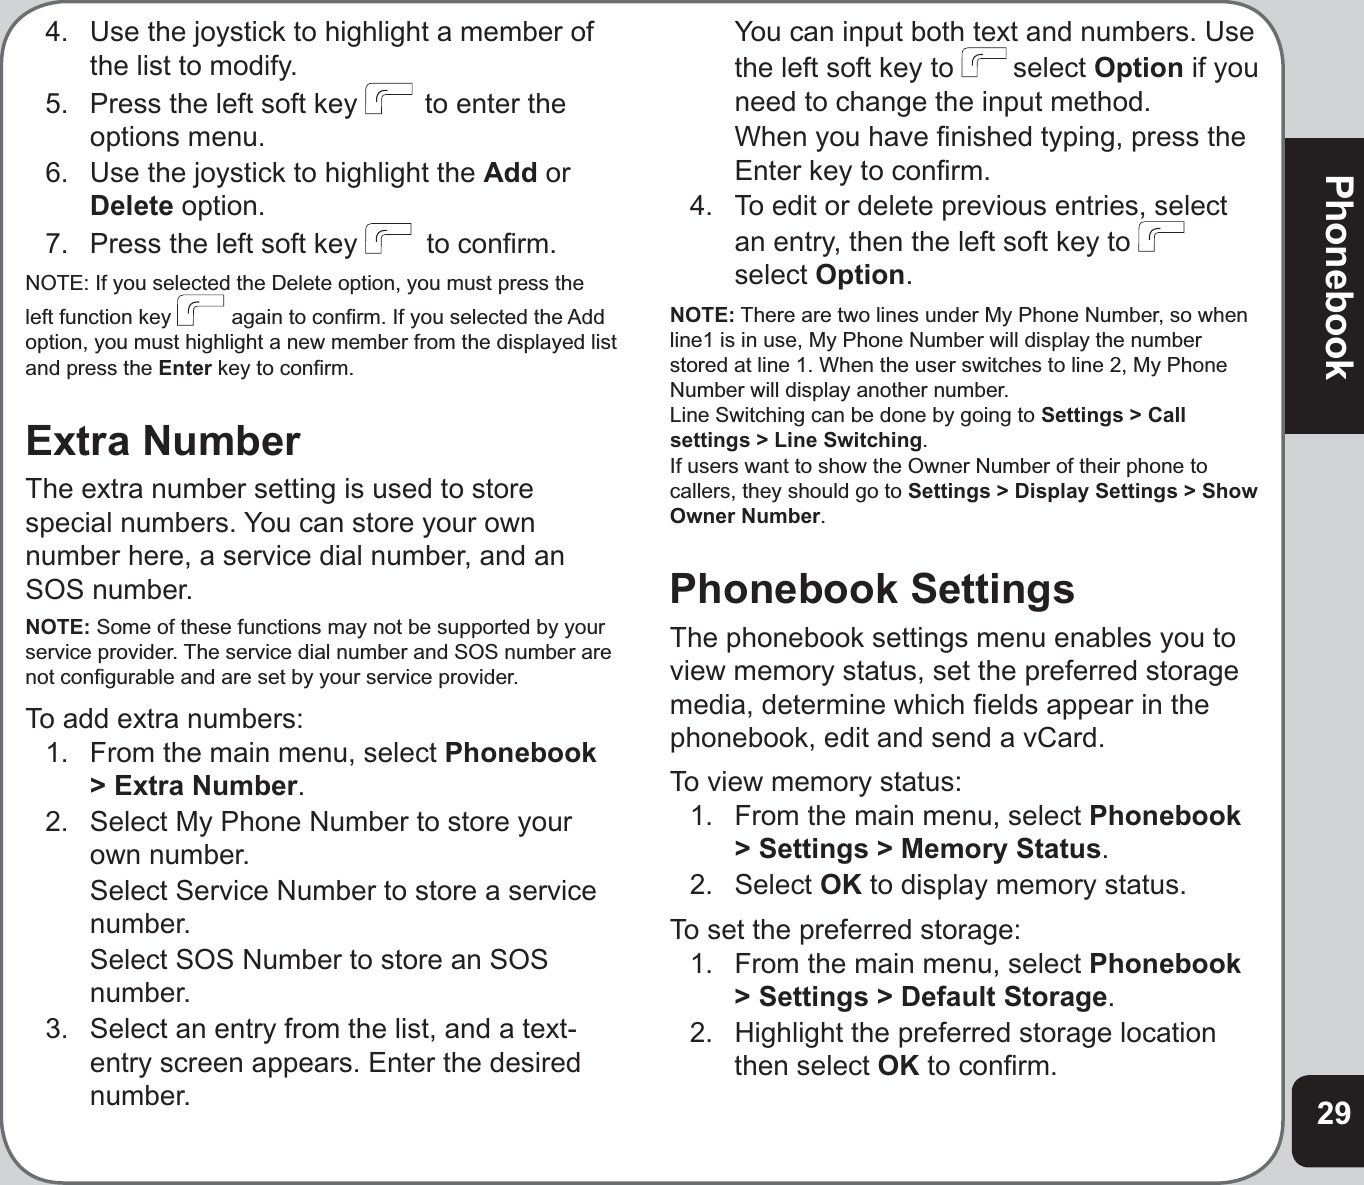 29Phonebook4.  Use the joystick to highlight a member of the list to modify.5.   Press the left soft key   to enter the options menu. 6.  Use the joystick to highlight the Add orDelete option.7.  Press the left soft key   to conﬁ rm.NOTE: If you selected the Delete option, you must press the left function key   again to conﬁ rm. If you selected the Add option, you must highlight a new member from the displayed list and press the Enter key to conﬁ rm.Extra NumberThe extra number setting is used to store special numbers. You can store your own number here, a service dial number, and an SOS number.NOTE: Some of these functions may not be supported by your service provider. The service dial number and SOS number are not conﬁ gurable and are set by your service provider.To add extra numbers:1.  From the main menu, select Phonebook&gt; Extra Number.2.   Select My Phone Number to store your own number.   Select Service Number to store a service number.  Select SOS Number to store an SOS number.3.   Select an entry from the list, and a text-entry screen appears. Enter the desired number.  You can input both text and numbers. Use the left soft key to  select Option if you need to change the input method.  When you have ﬁ nished typing, press the Enter key to conﬁ rm.4.  To edit or delete previous entries, select an entry, then the left soft key to select Option.NOTE: There are two lines under My Phone Number, so when line1 is in use, My Phone Number will display the number stored at line 1. When the user switches to line 2, My Phone Number will display another number. Line Switching can be done by going to Settings &gt; Call settings &gt; Line Switching.If users want to show the Owner Number of their phone to callers, they should go to Settings &gt; Display Settings &gt; Show Owner Number.Phonebook SettingsThe phonebook settings menu enables you to view memory status, set the preferred storage media, determine which ﬁ elds appear in the phonebook, edit and send a vCard.To view memory status:1.  From the main menu, select Phonebook&gt; Settings &gt; Memory Status.2. Select OK to display memory status.To set the preferred storage:1.  From the main menu, select Phonebook&gt; Settings &gt; Default Storage.2.  Highlight the preferred storage location then select OK to conﬁ rm.